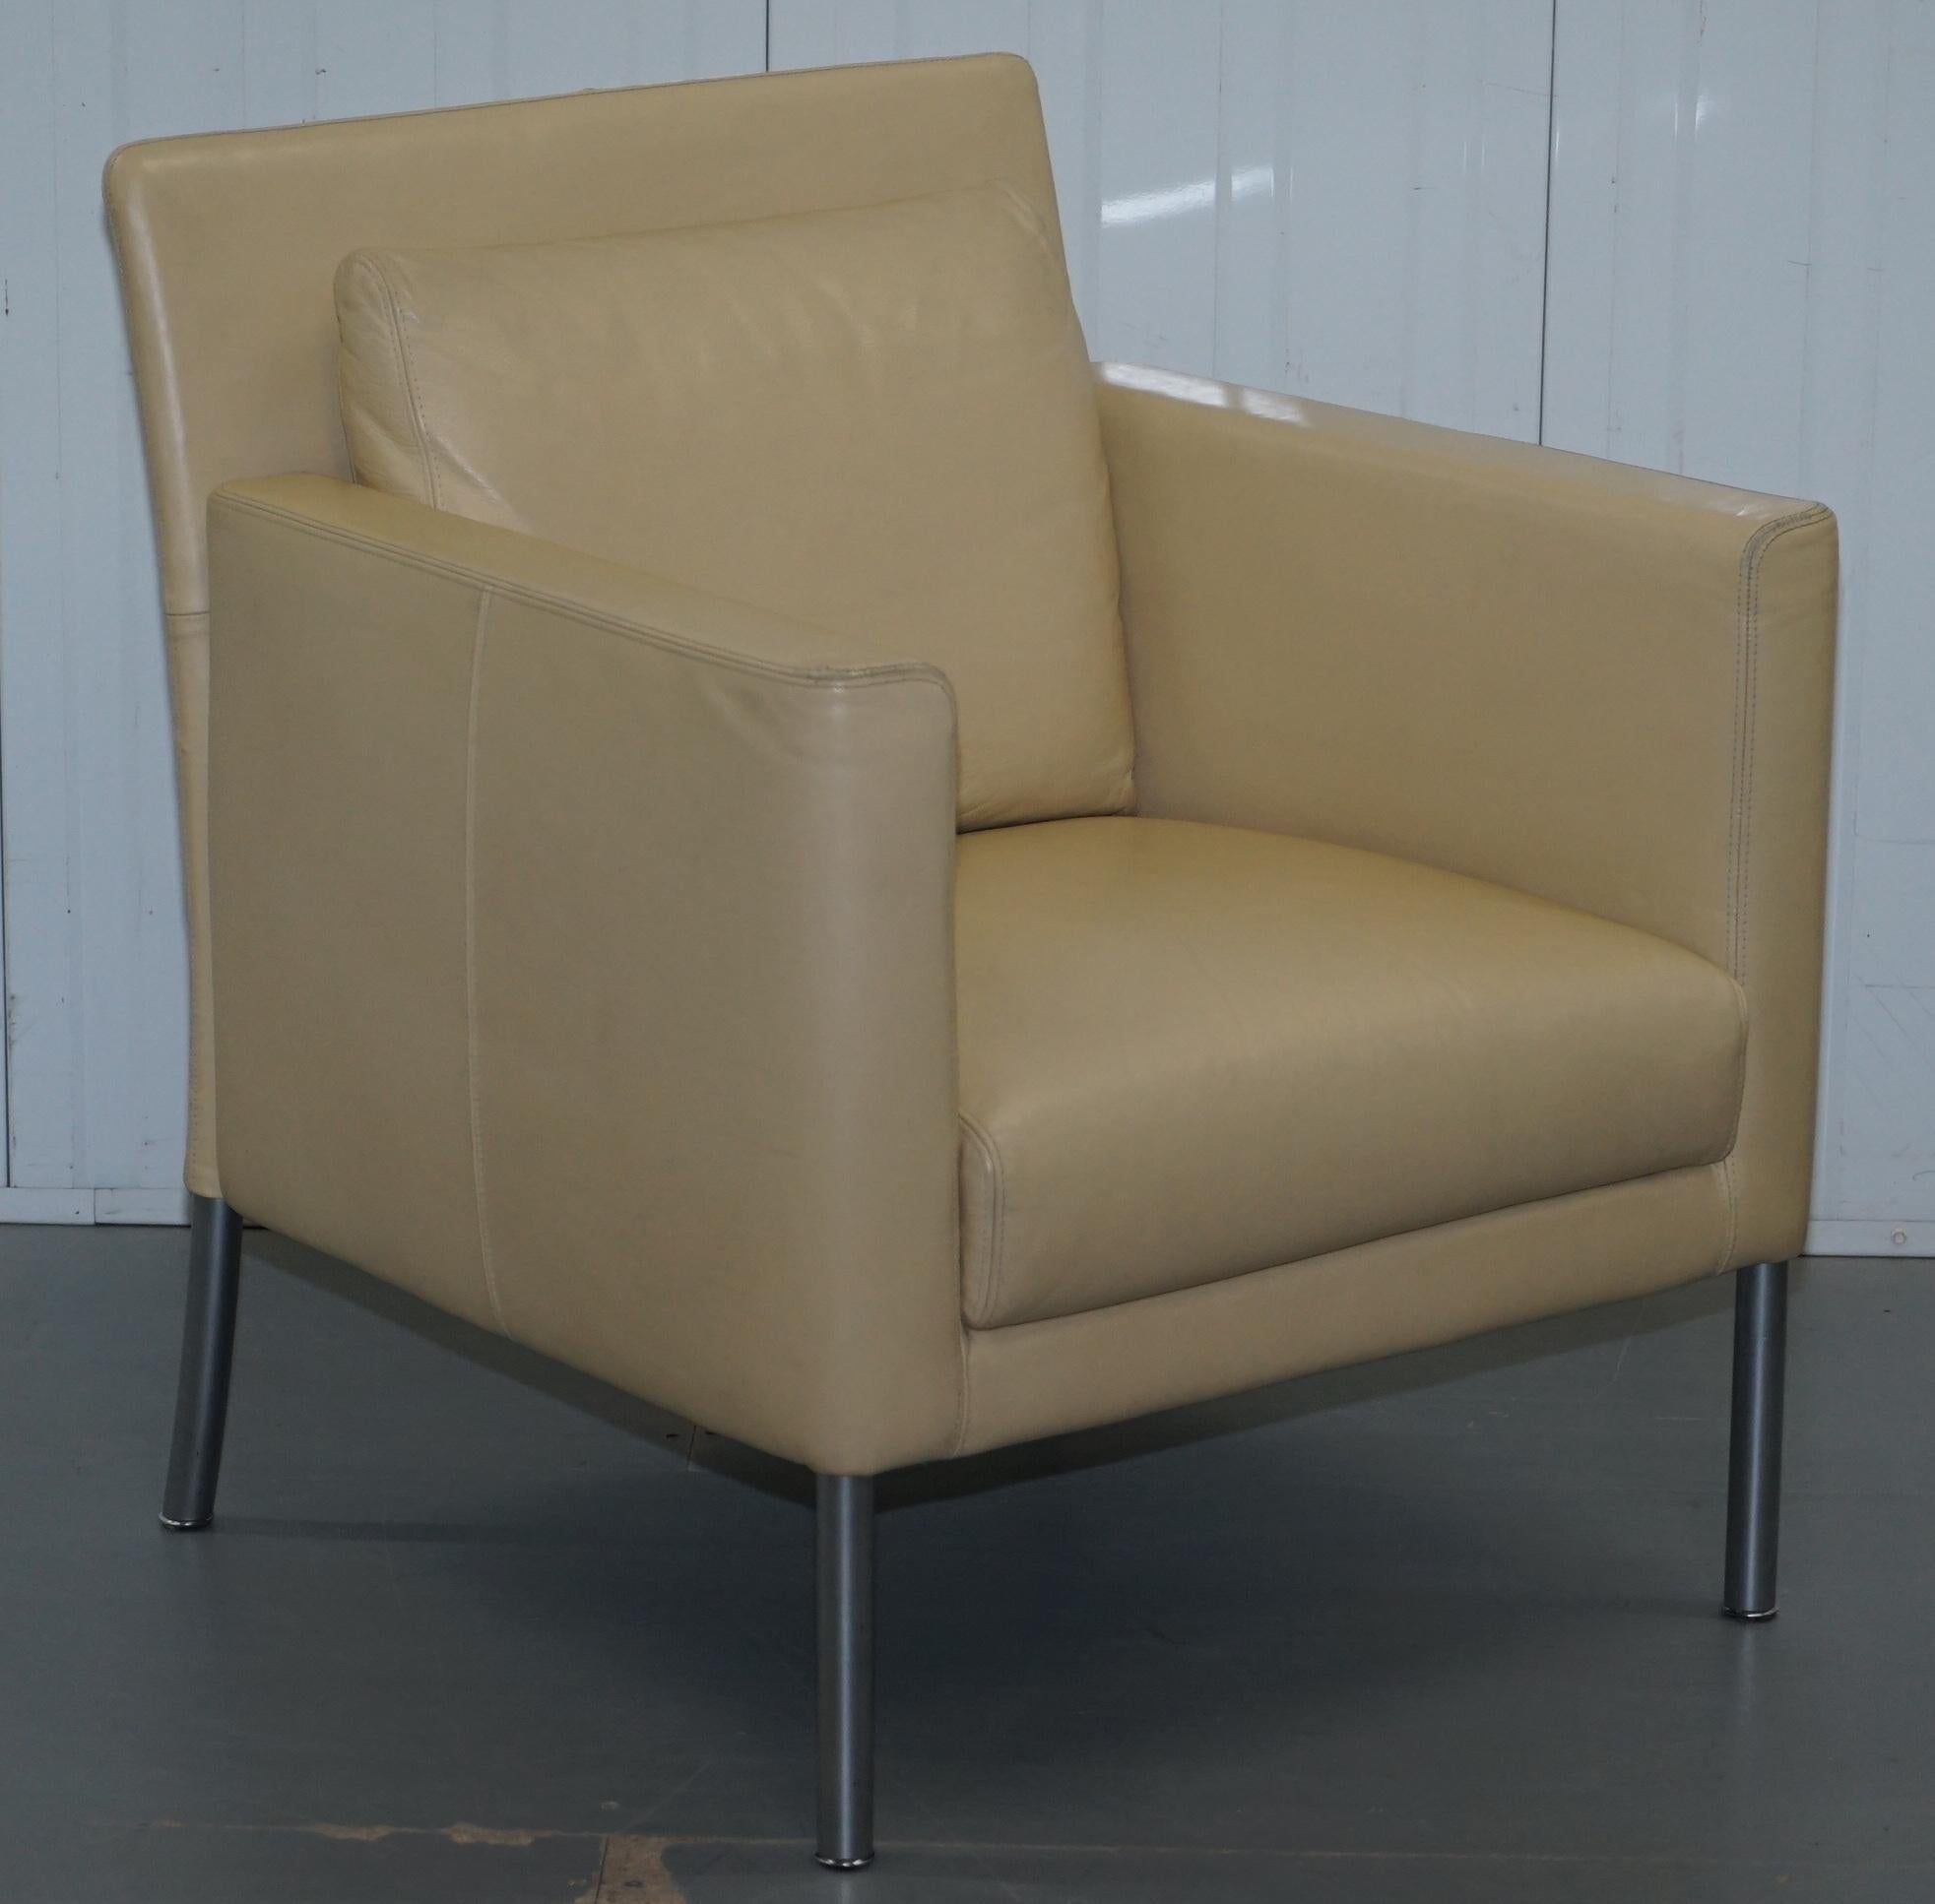 We are delighted to offer for sale this lovely pair of original Walter Knoll Jason 391 cream leather armchairs RRP £6000

The clarity of this range is nothing short of architectural. Armrests on slender supports; the back gently curving, gently